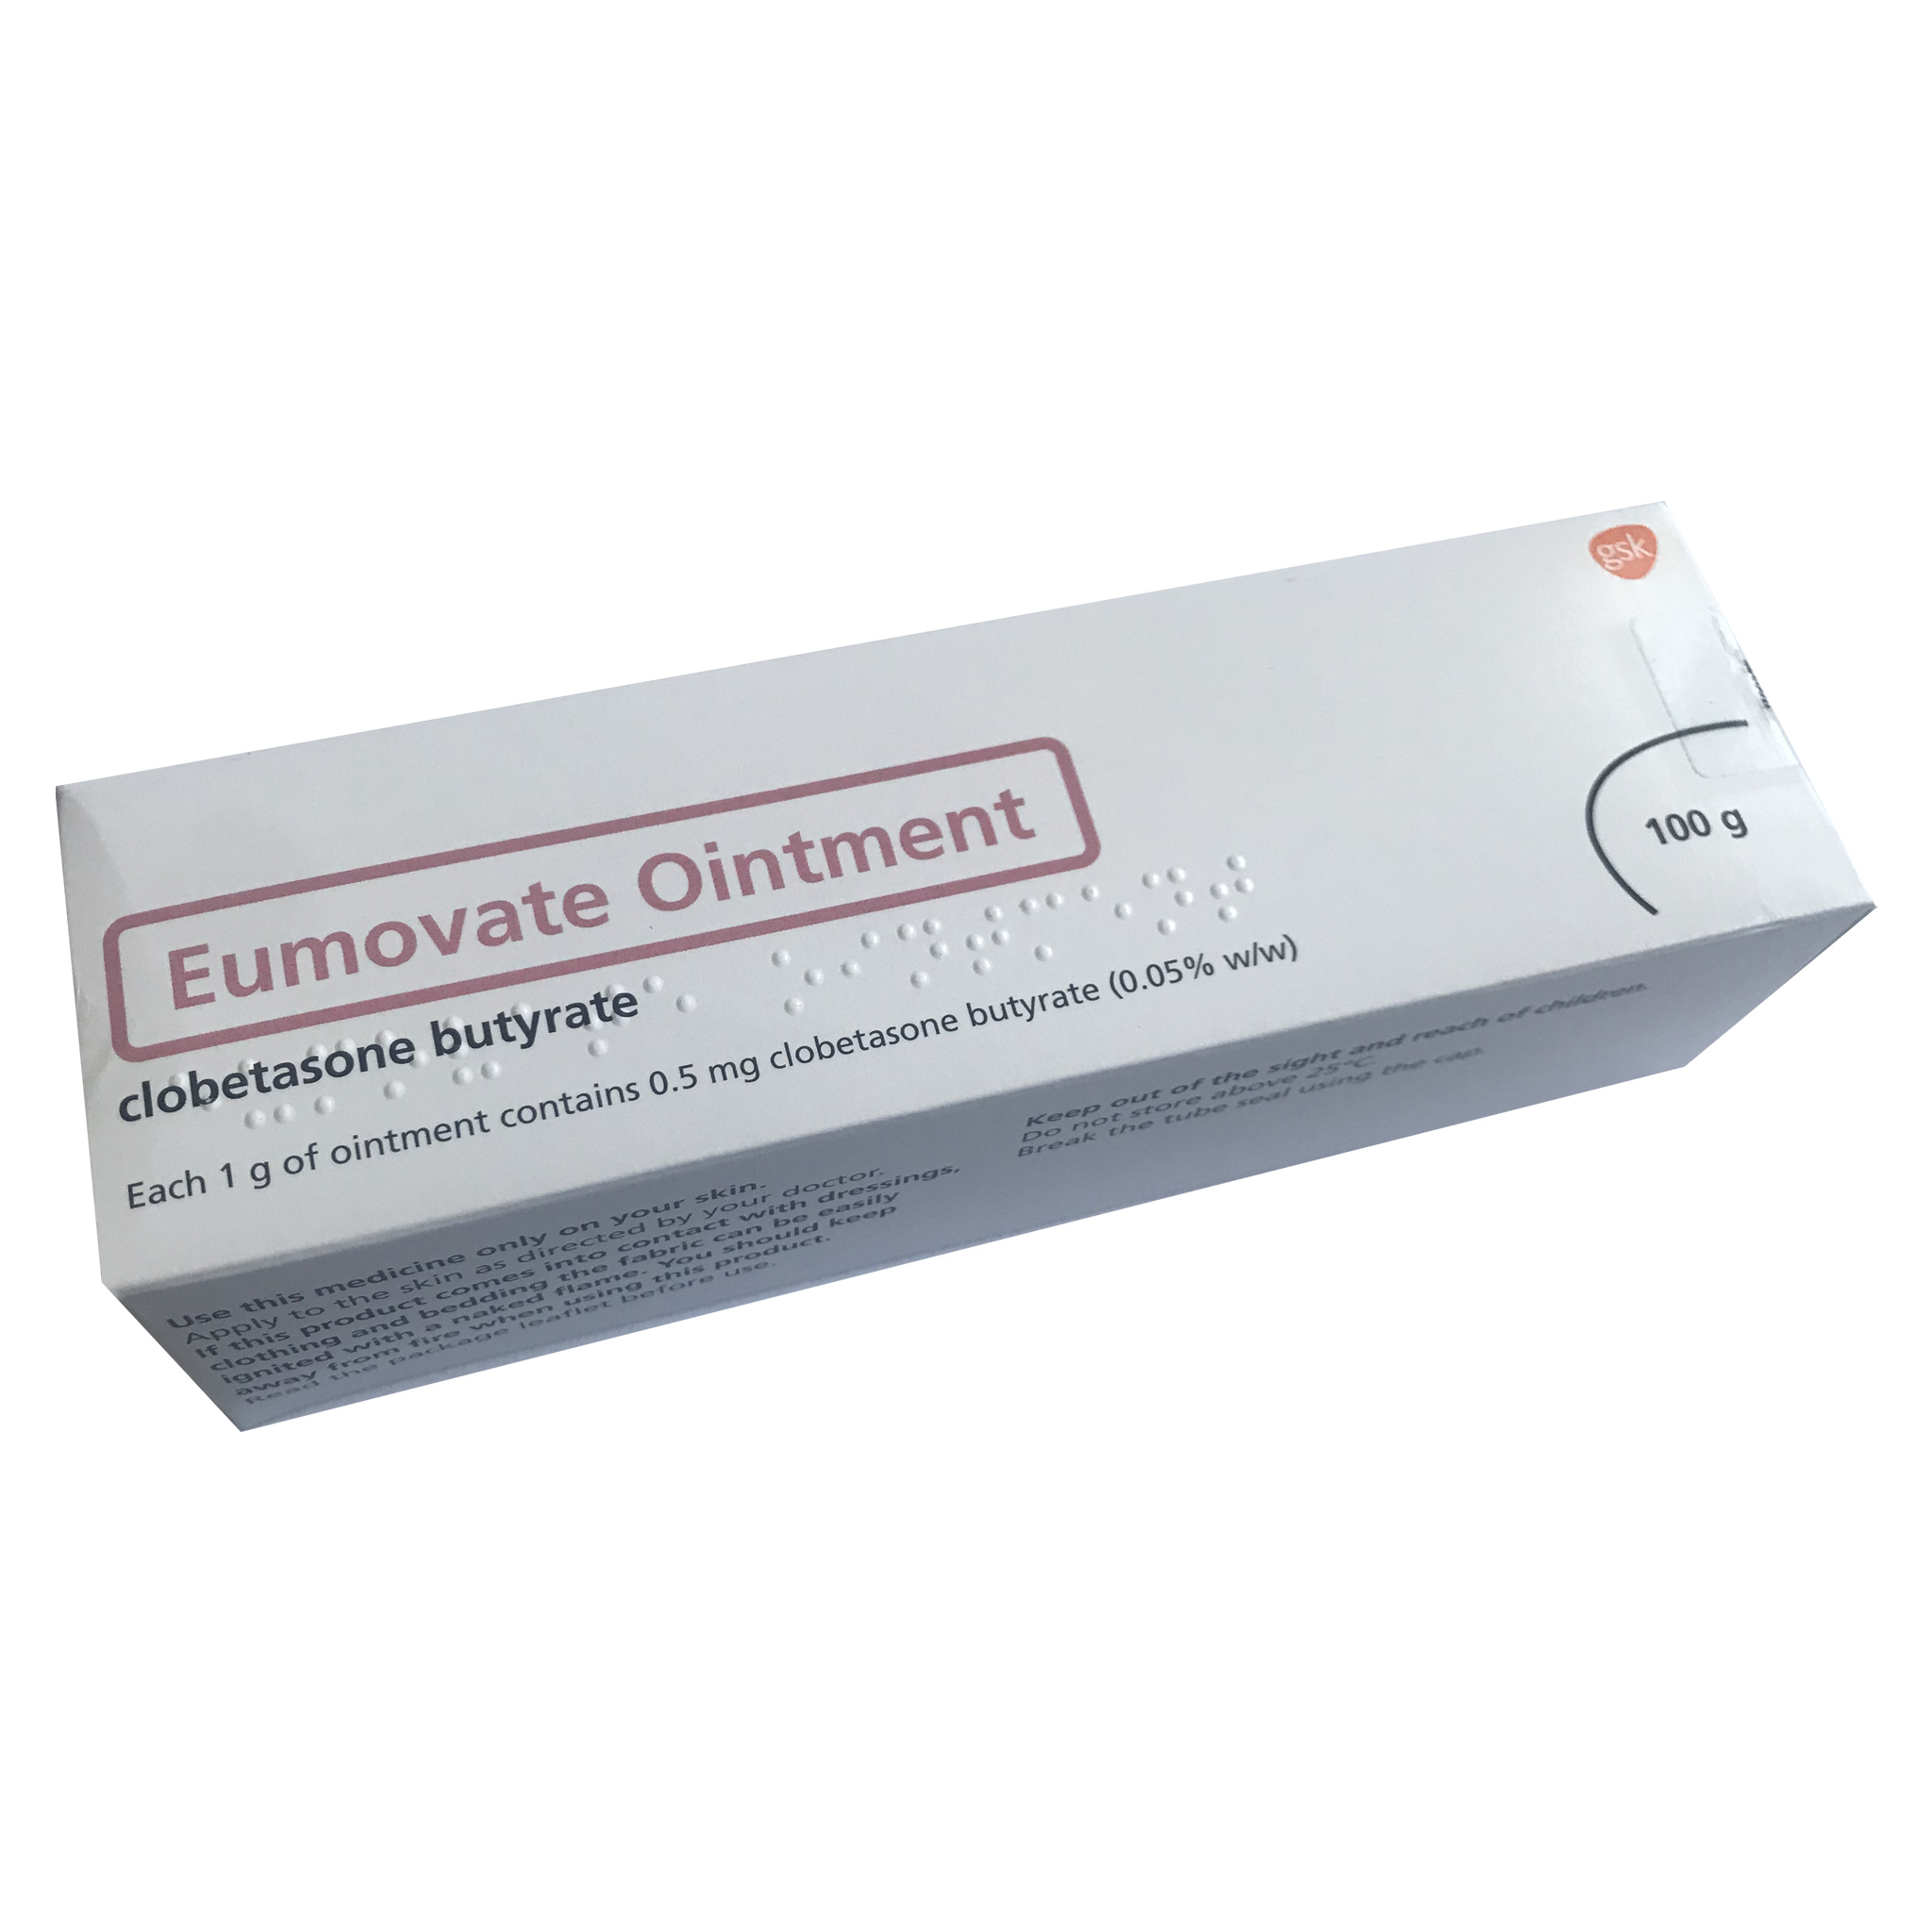 Eumovate 0.05% Cream/Ointment - Ointment, 30g